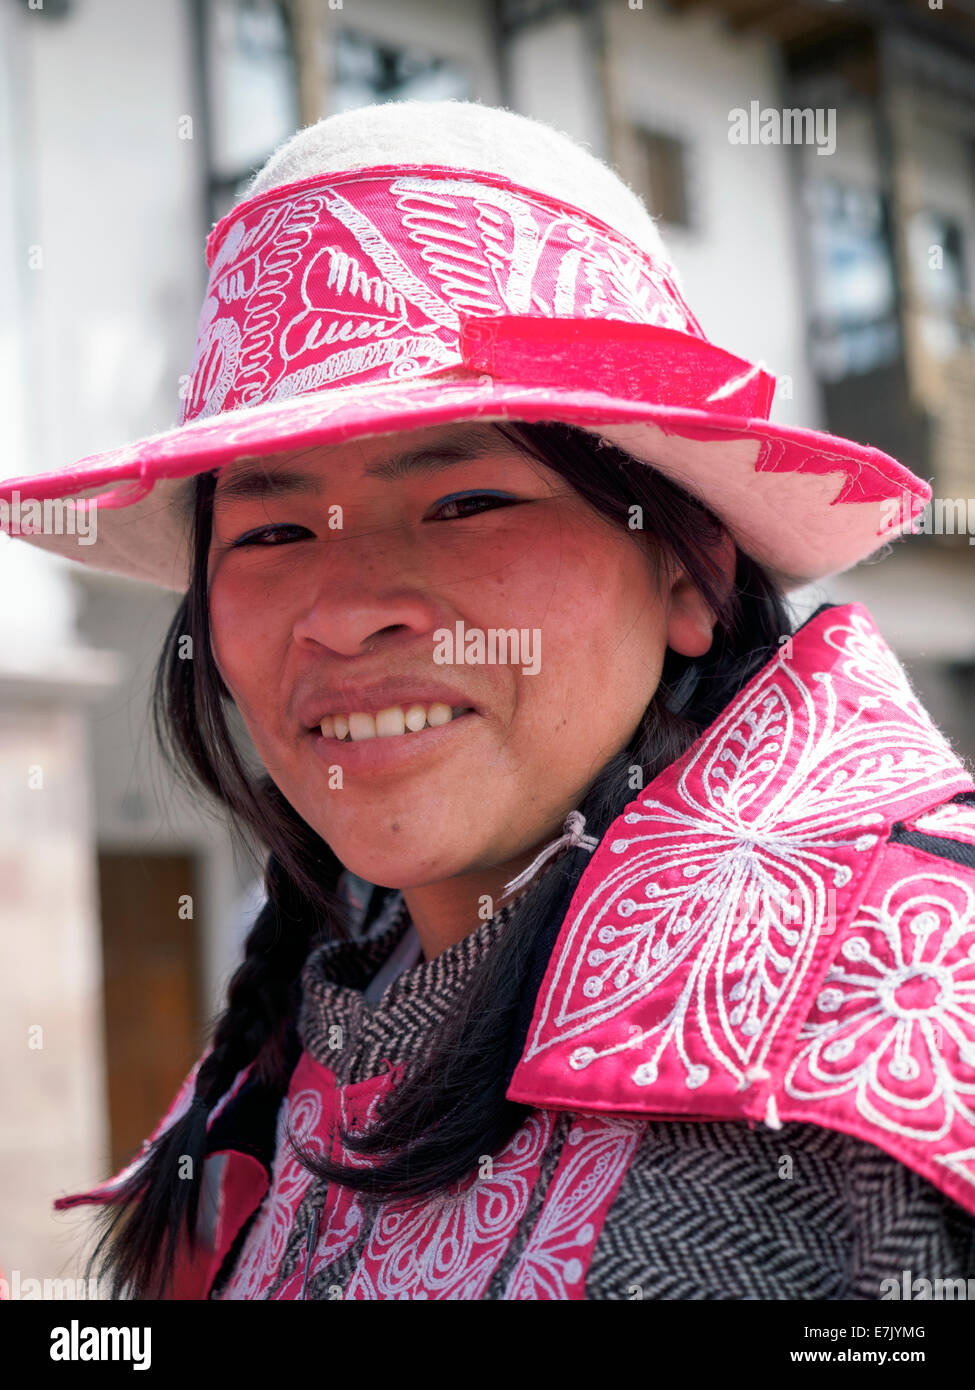 Quechua woman at the Cusco Week festivites held each year in June leading up to the Inti Raymi festival - Cusco, Peru Stock Photo